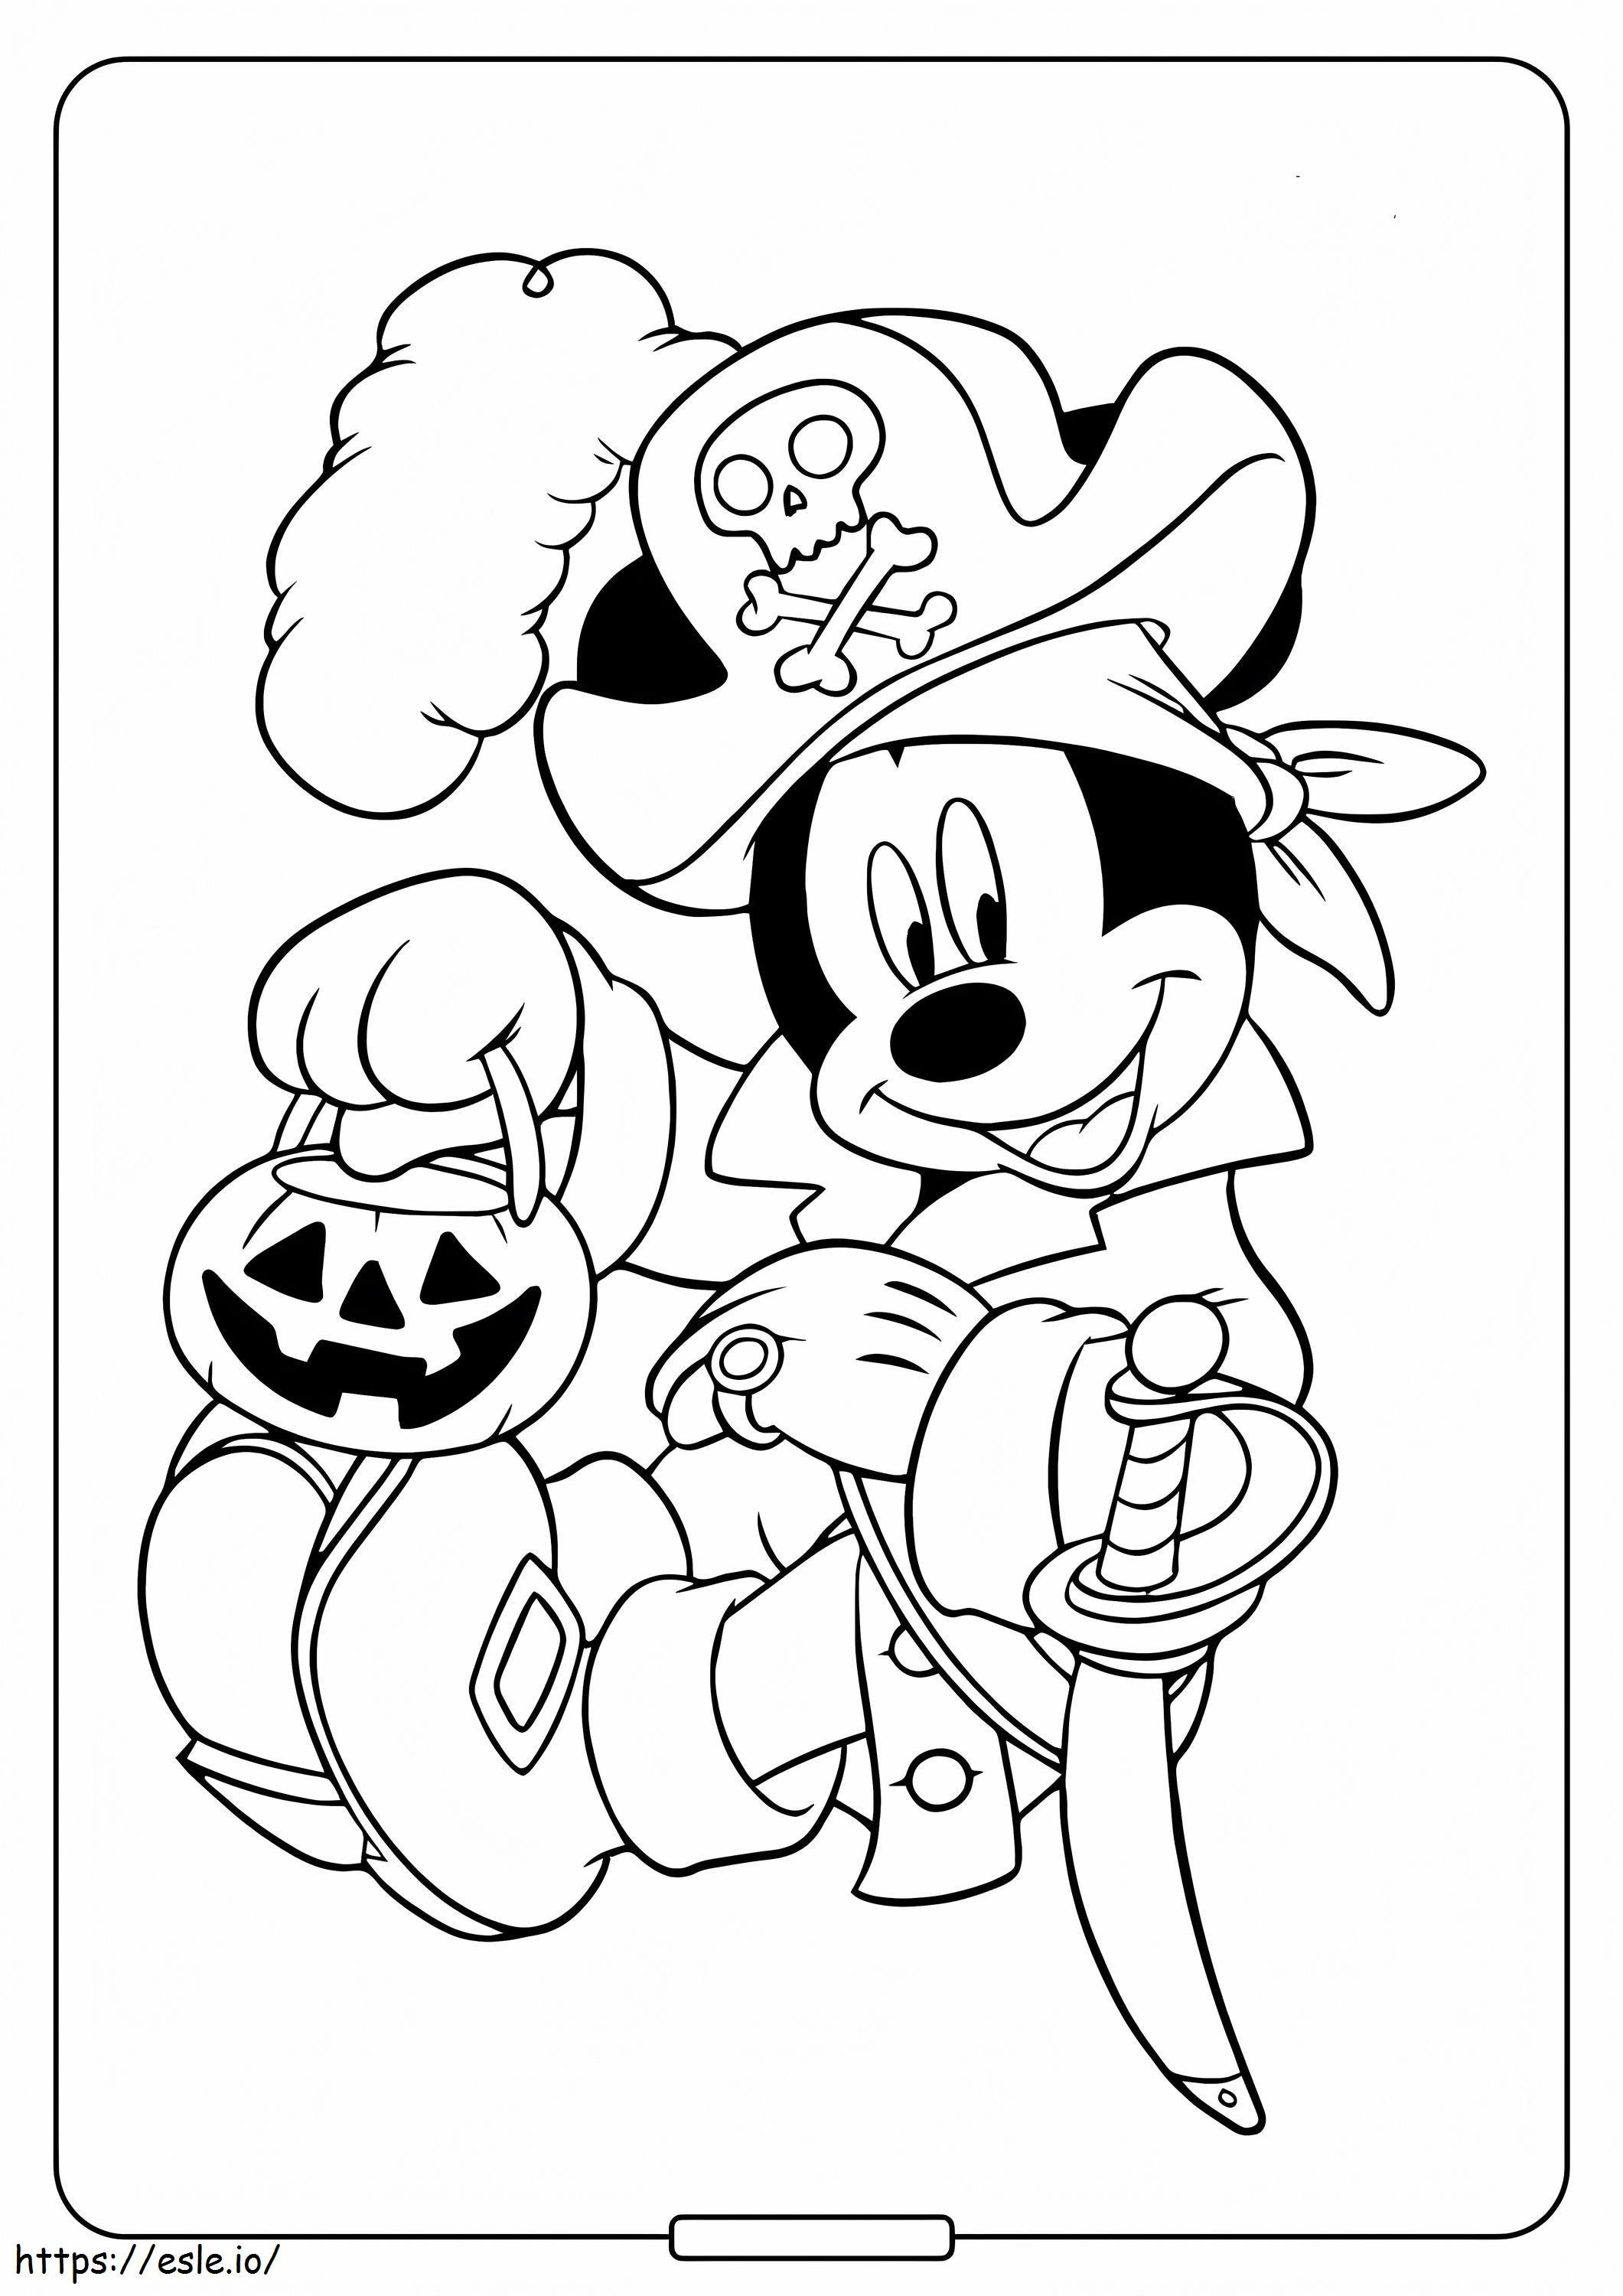 Mickey Mouse Halloween coloring page